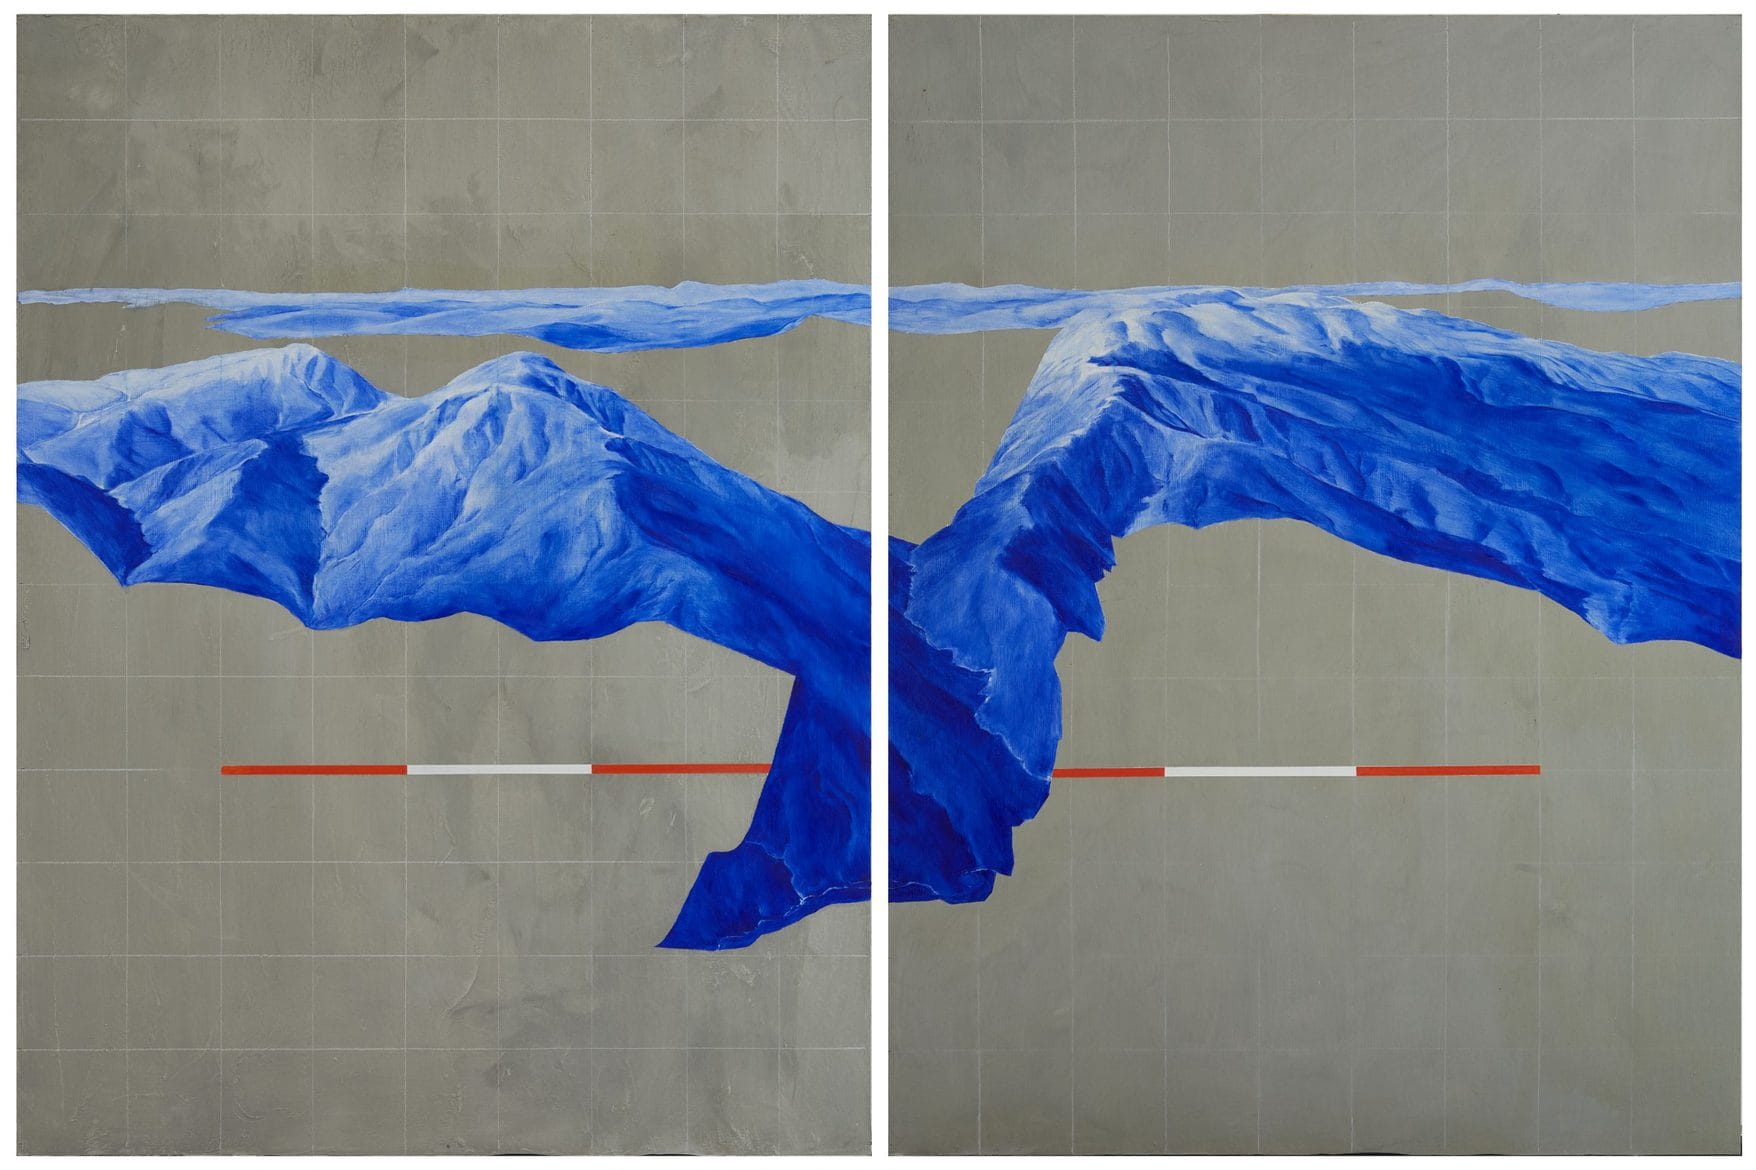 'Weizmann Experiment (You are Here), 2019, oil and concrete on board, diptych, 120 x 180 cm overall